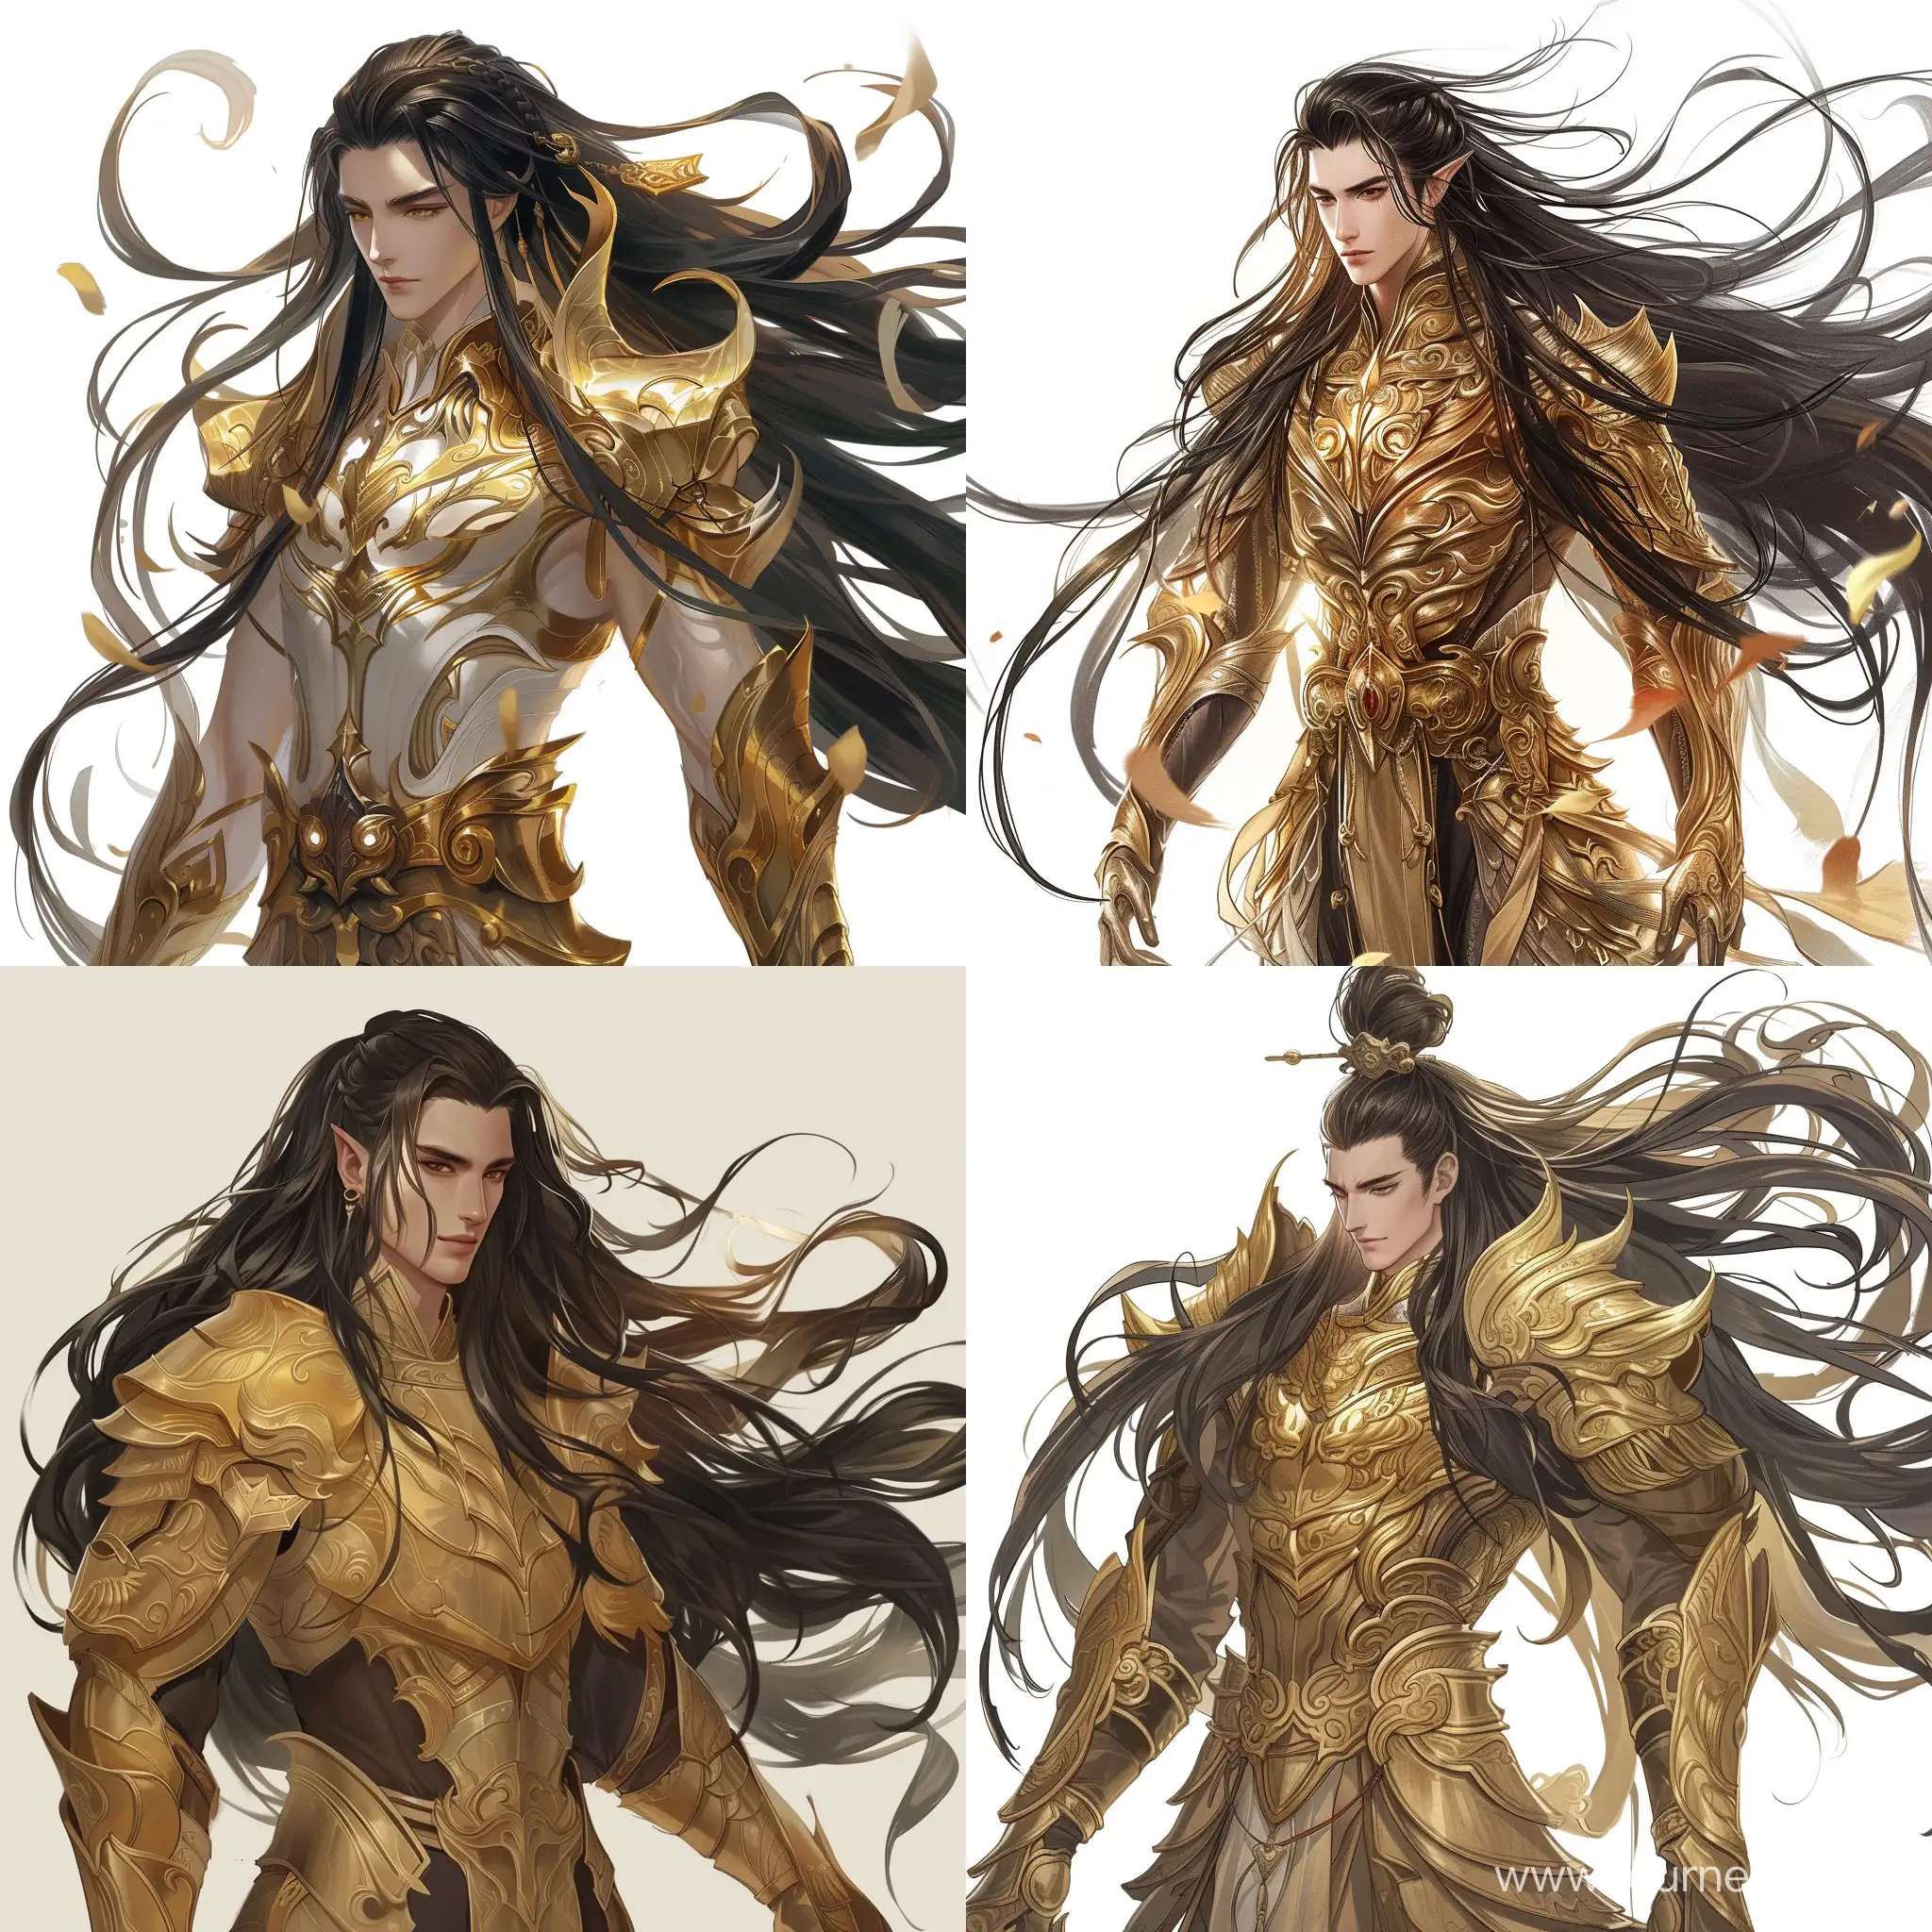 Majestic-Warrior-in-Golden-Armor-Chinese-MMORPG-Character-Art